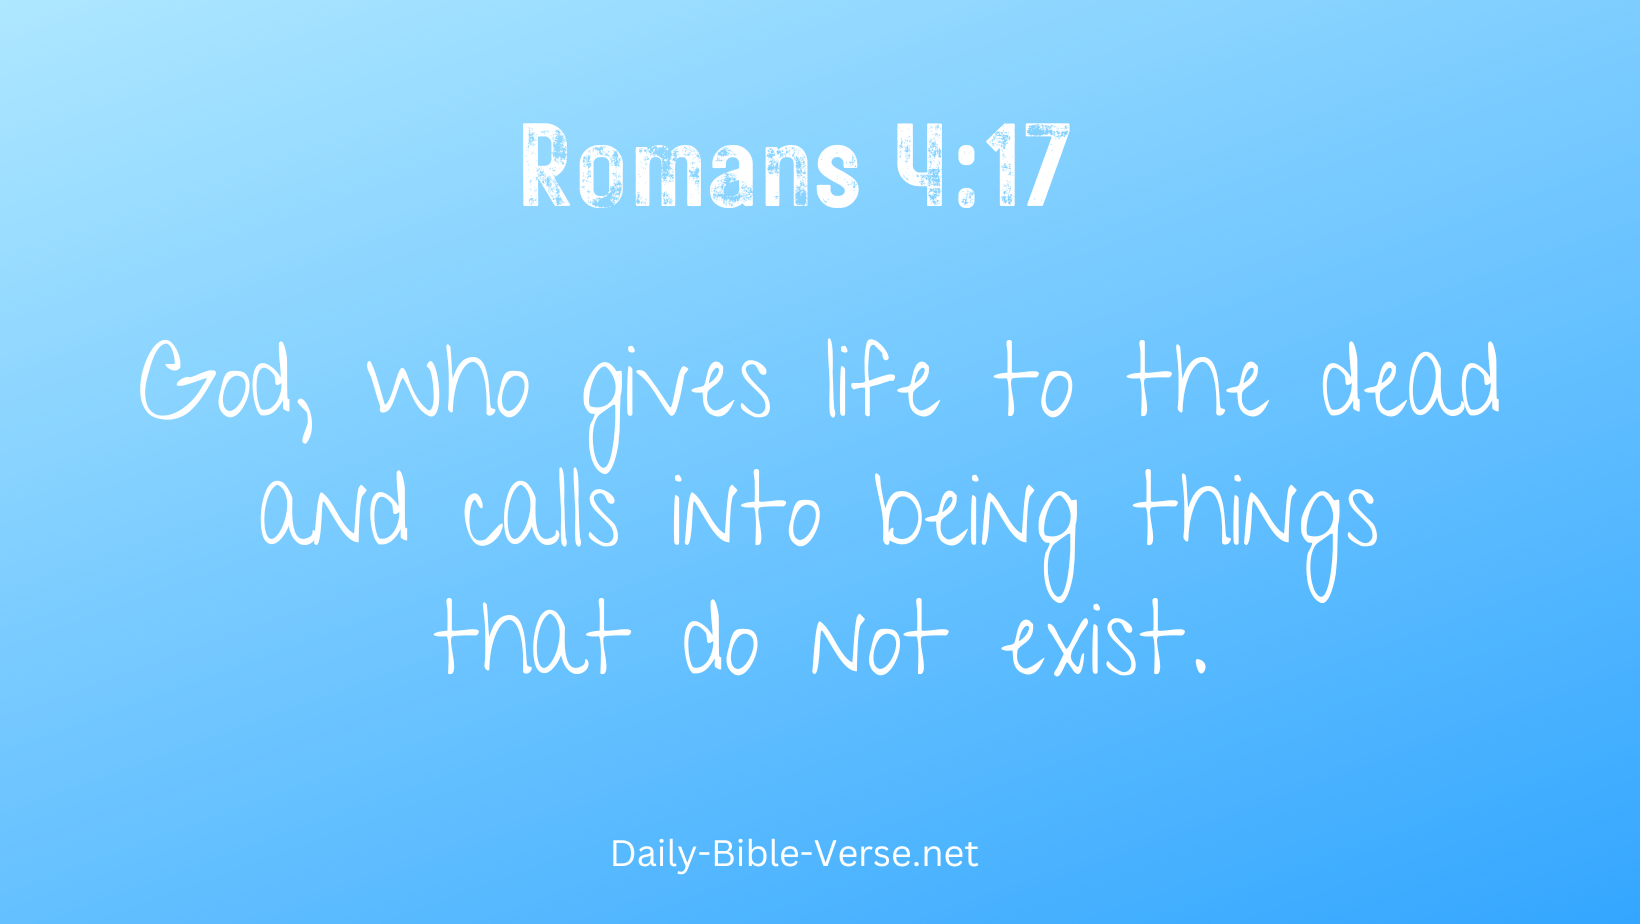 God, who gives life to the dead and calls into being things that do not exist.